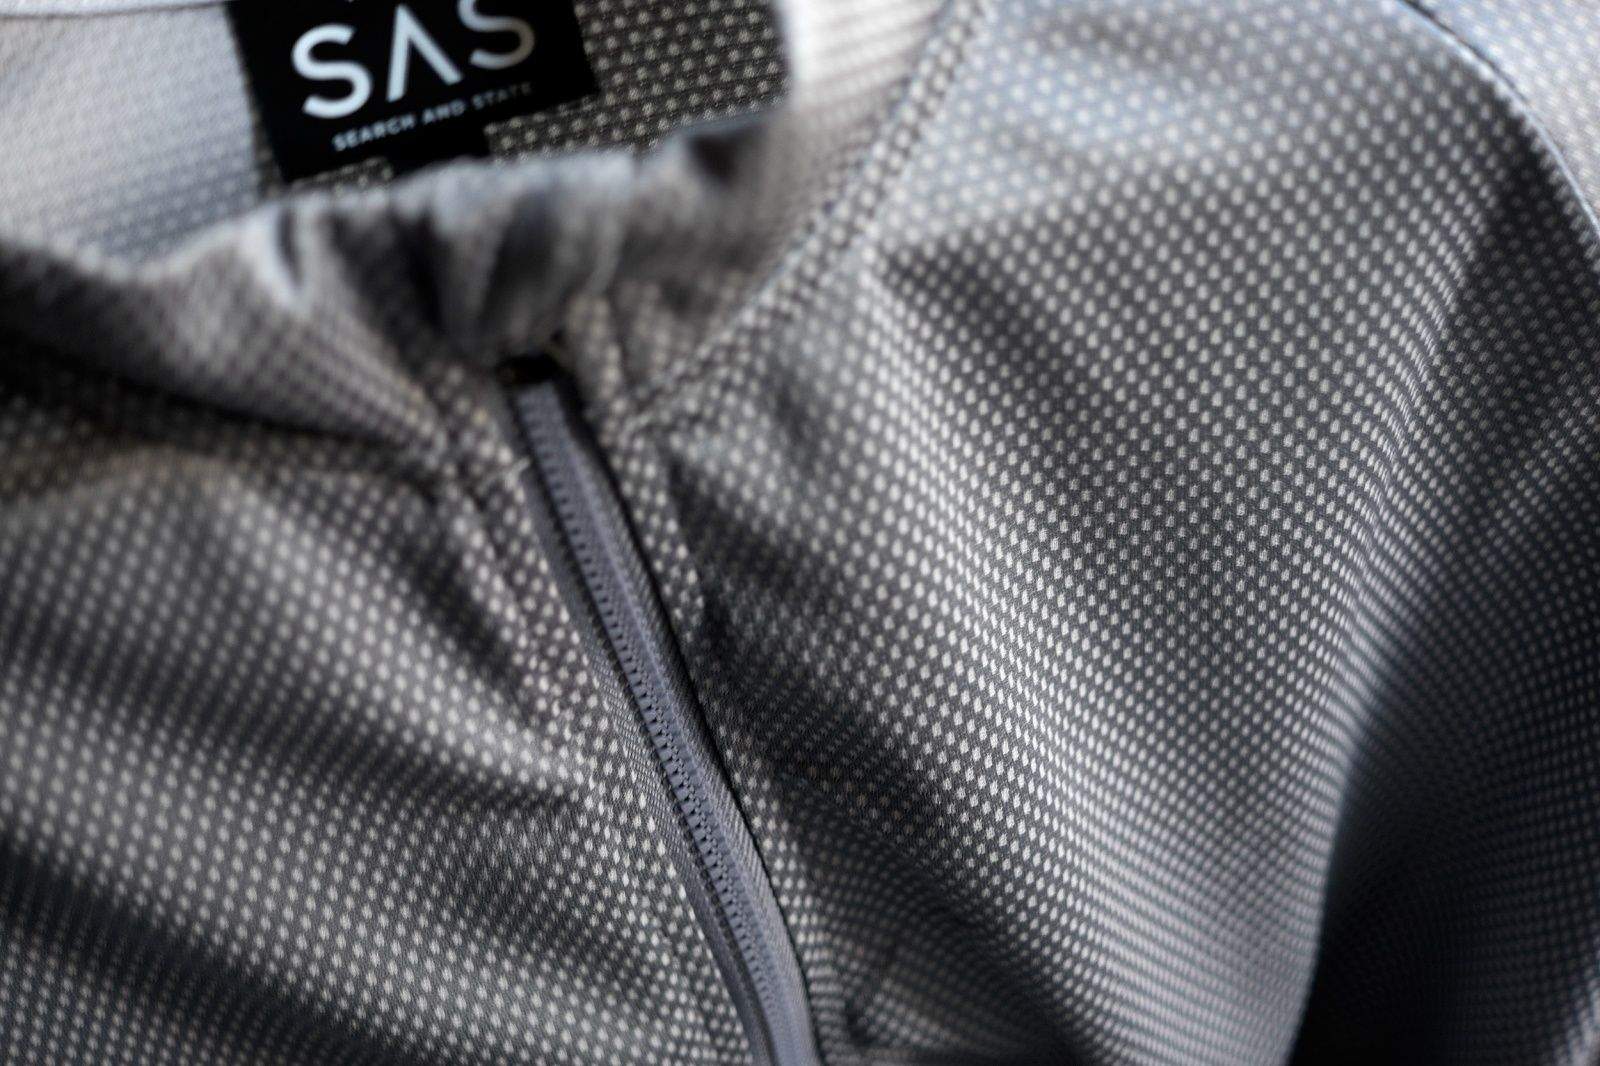 Each month, Lust List rounds up the gear that makes it so we can't feel our faces. This time around we're loving hot music machines, cool photo accessories and more.

S1-A Bicycle Jersey by Search and State

Earlier this summer, Search and State released its version of the ugly-ass Hawaiian shirt in the form of a bicycle jersey. I stared at it for weeks wondering if I could pull off the look while riding in the Oakland hills. While I contemplated my fashion boldness, Search and State apparently sold every last one of those jerseys. I decided I need to get my hands on one of the company's tamer garments to see what the Midtown Manhattan manufacturers have going on.

What they are doing is making beautiful bicycle attire in the heart of what was once New York's garment center. The $140 S1-A bicycle jersey is impeccably sewn and has an understated appearance even the most fashion-challenged can deal with. Nice choice on the zipper, too. — Jim Merithew

Buy from: Search and State